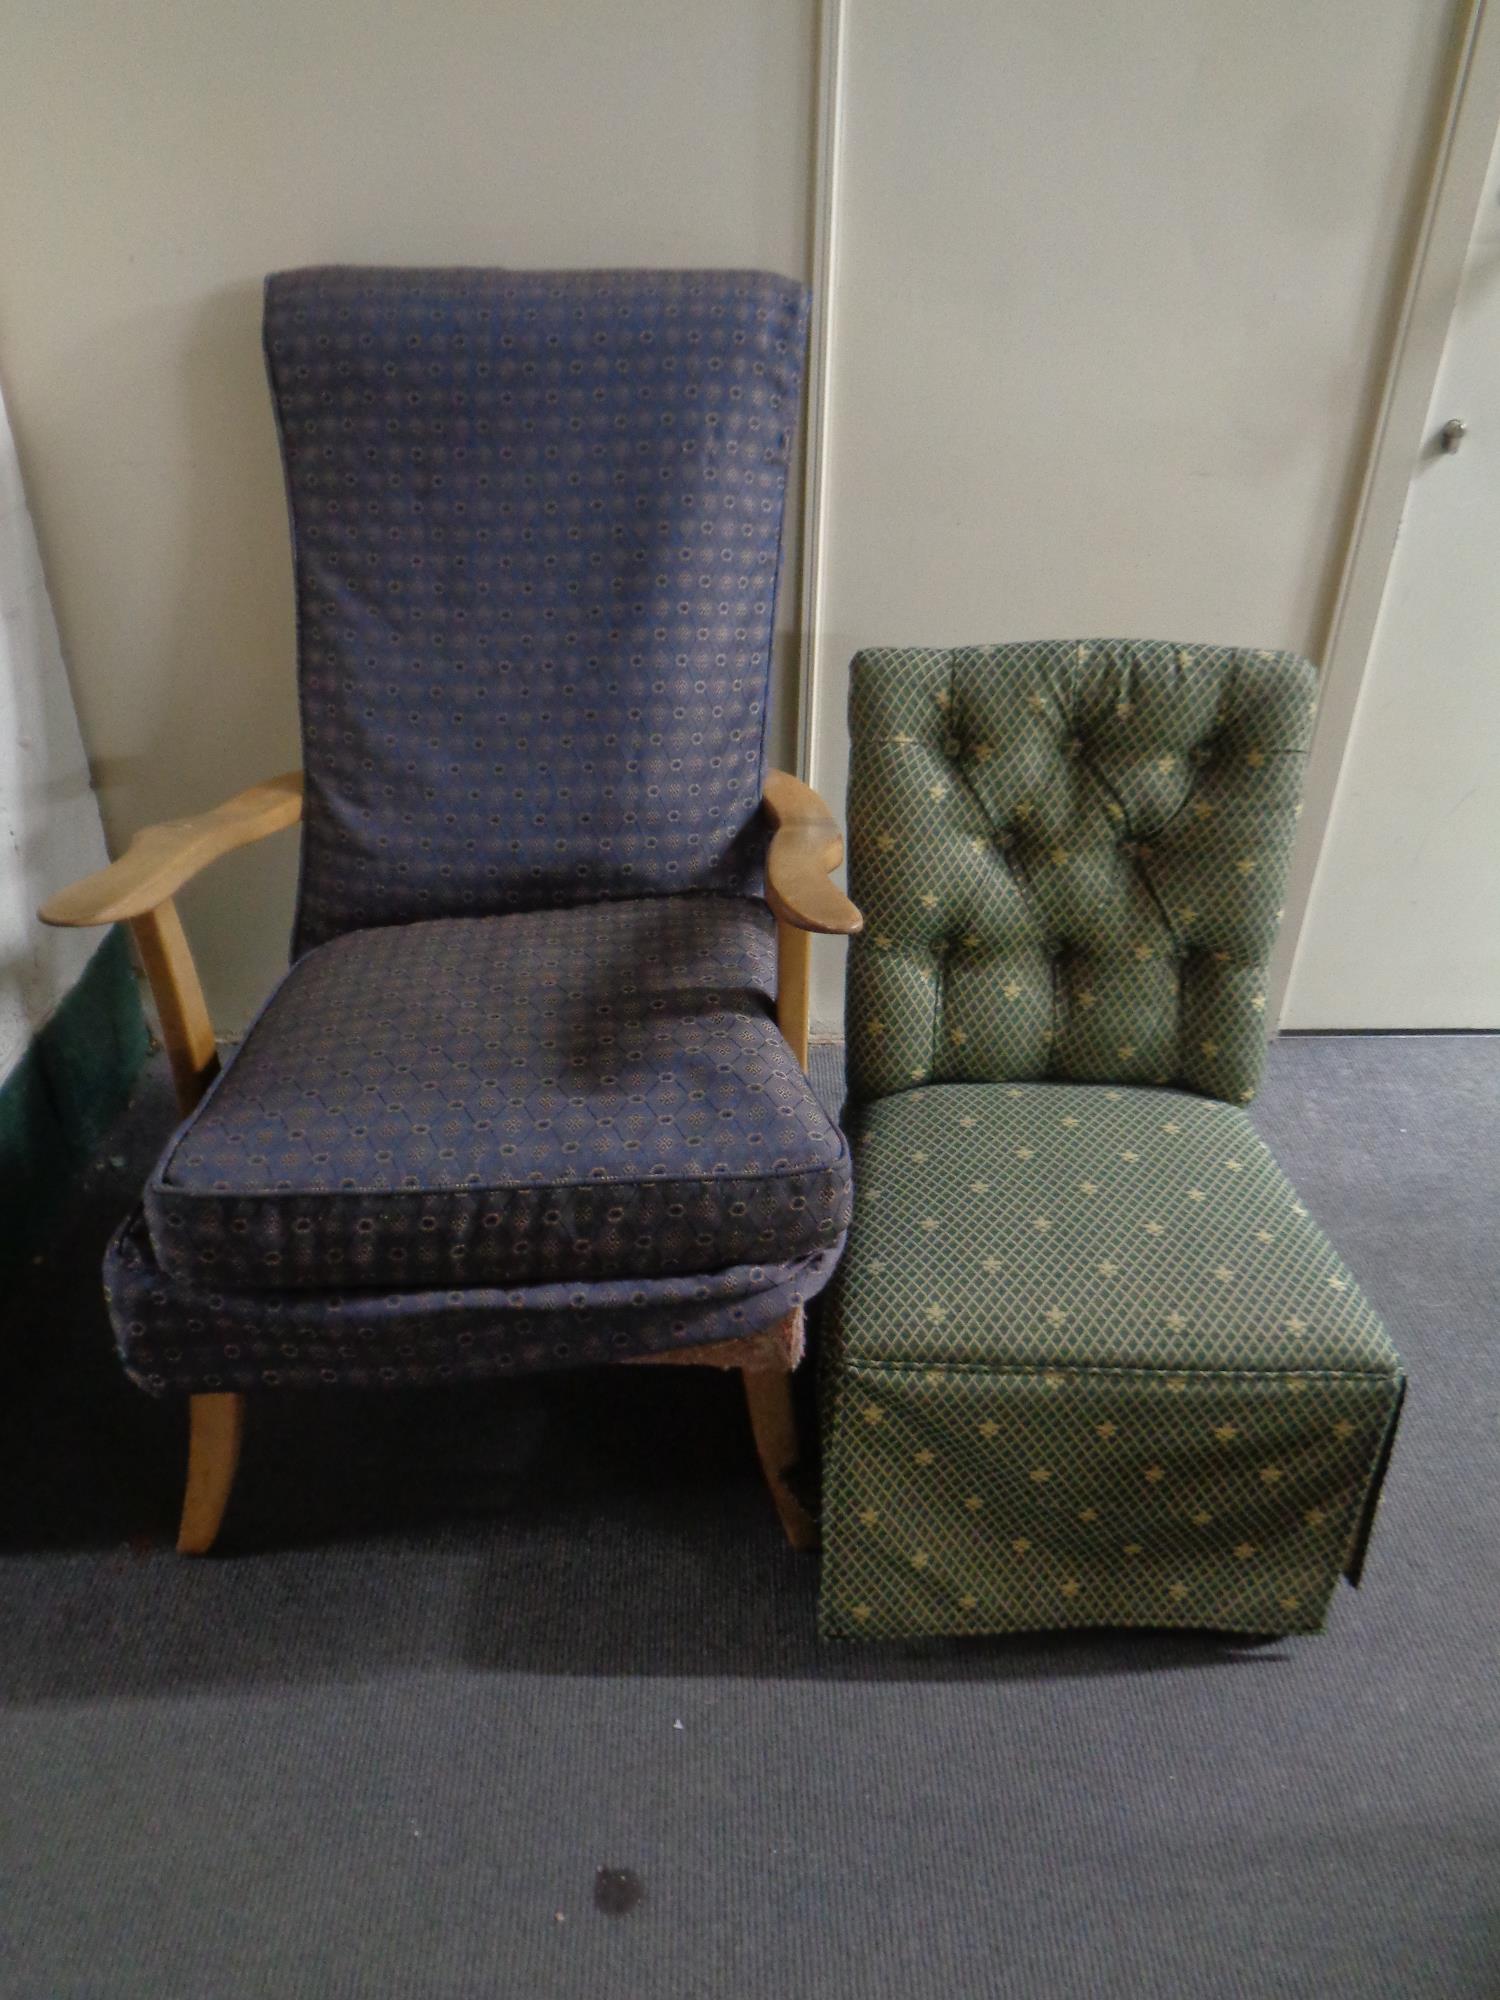 An Edwardian bedroom chair with a loose cover together with a mid 20th century armchair